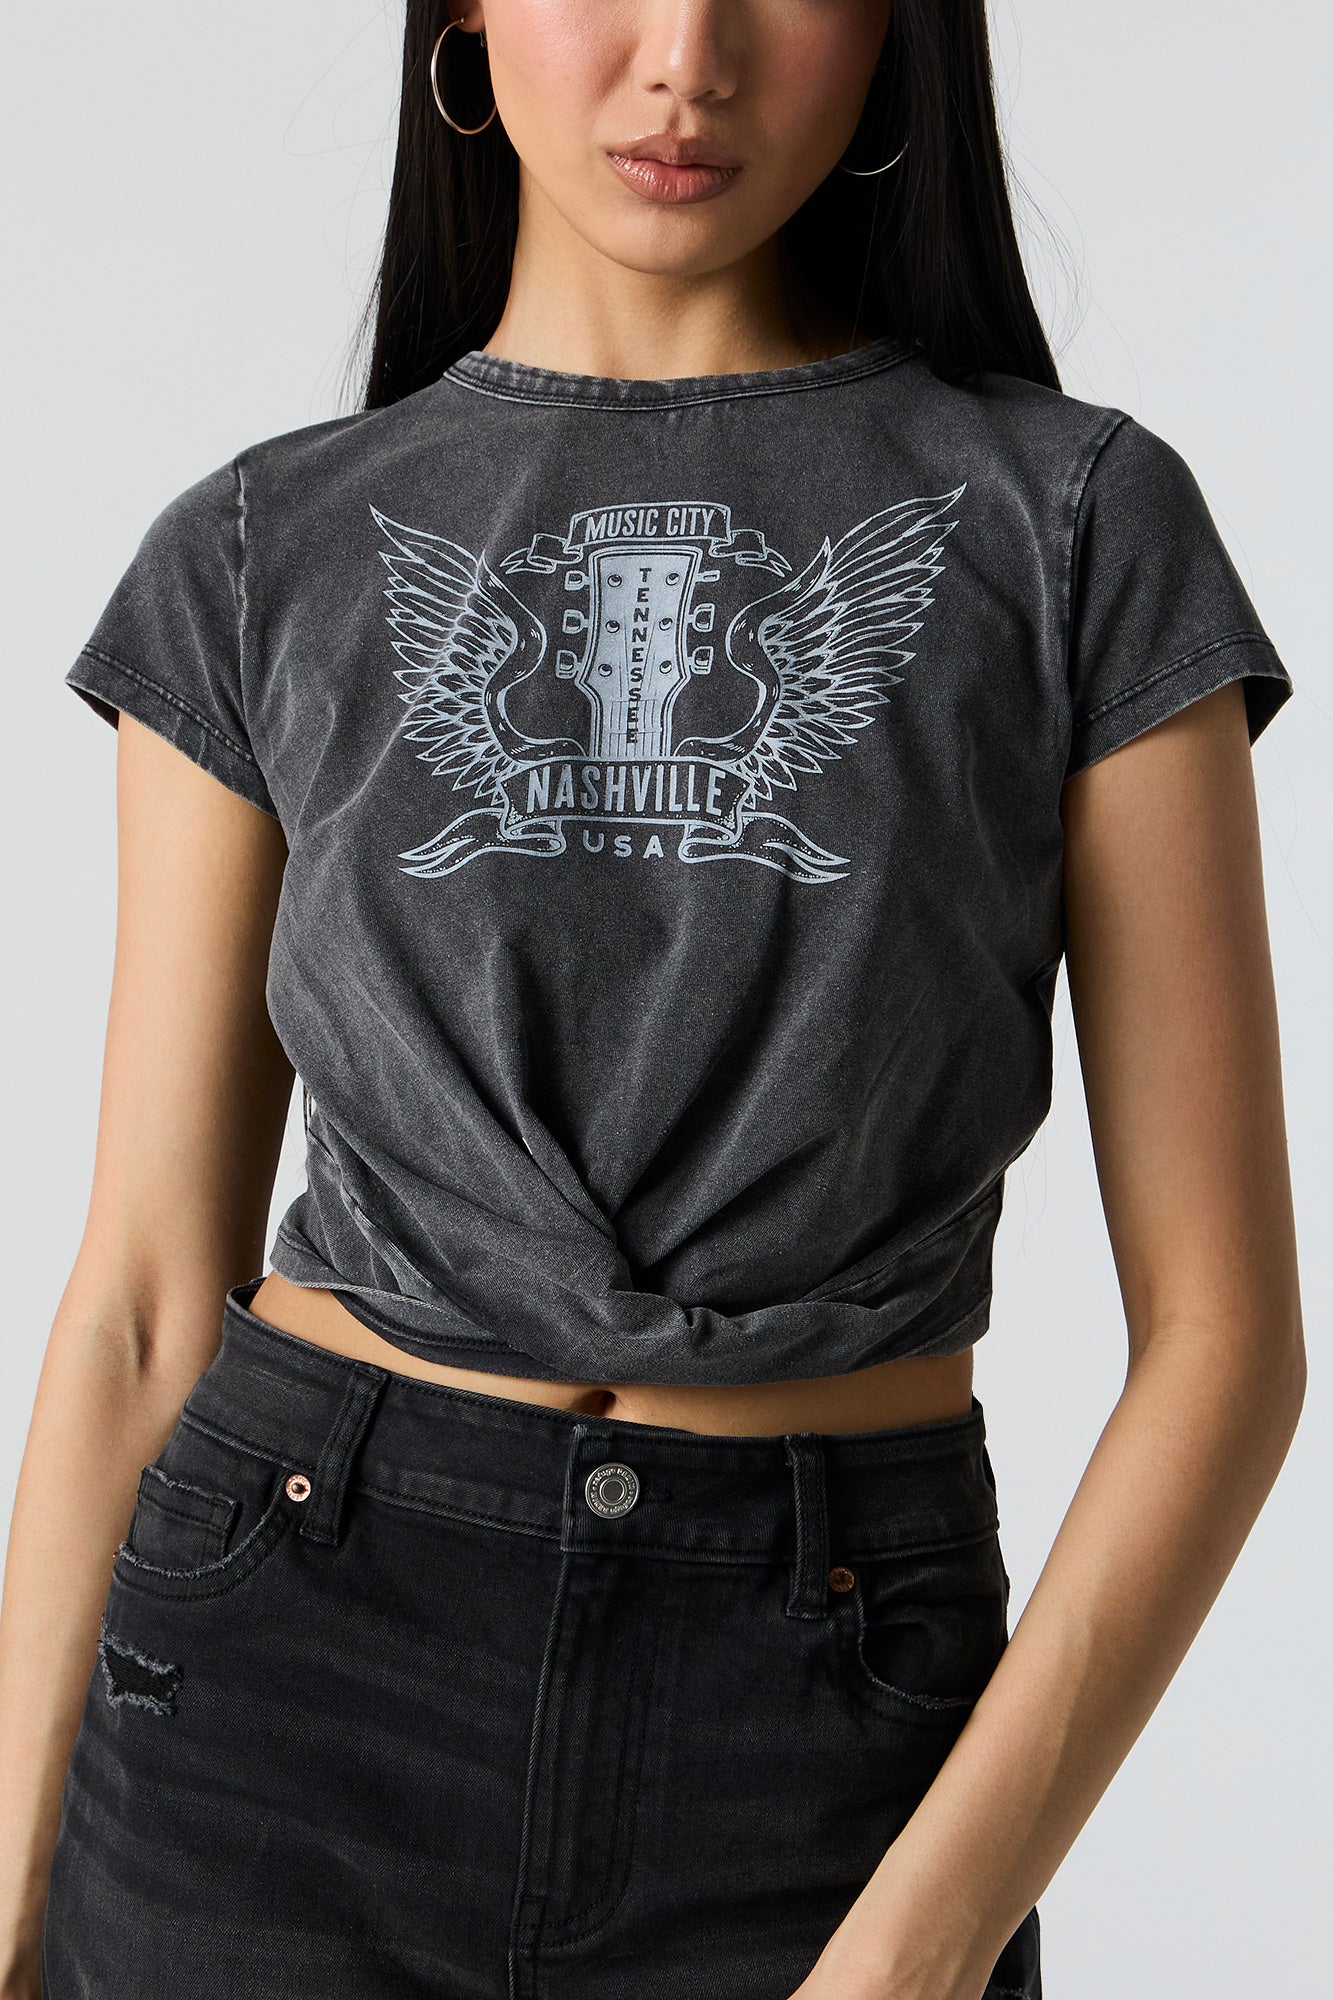 Nashville Music City Graphic Knotted T-Shirt